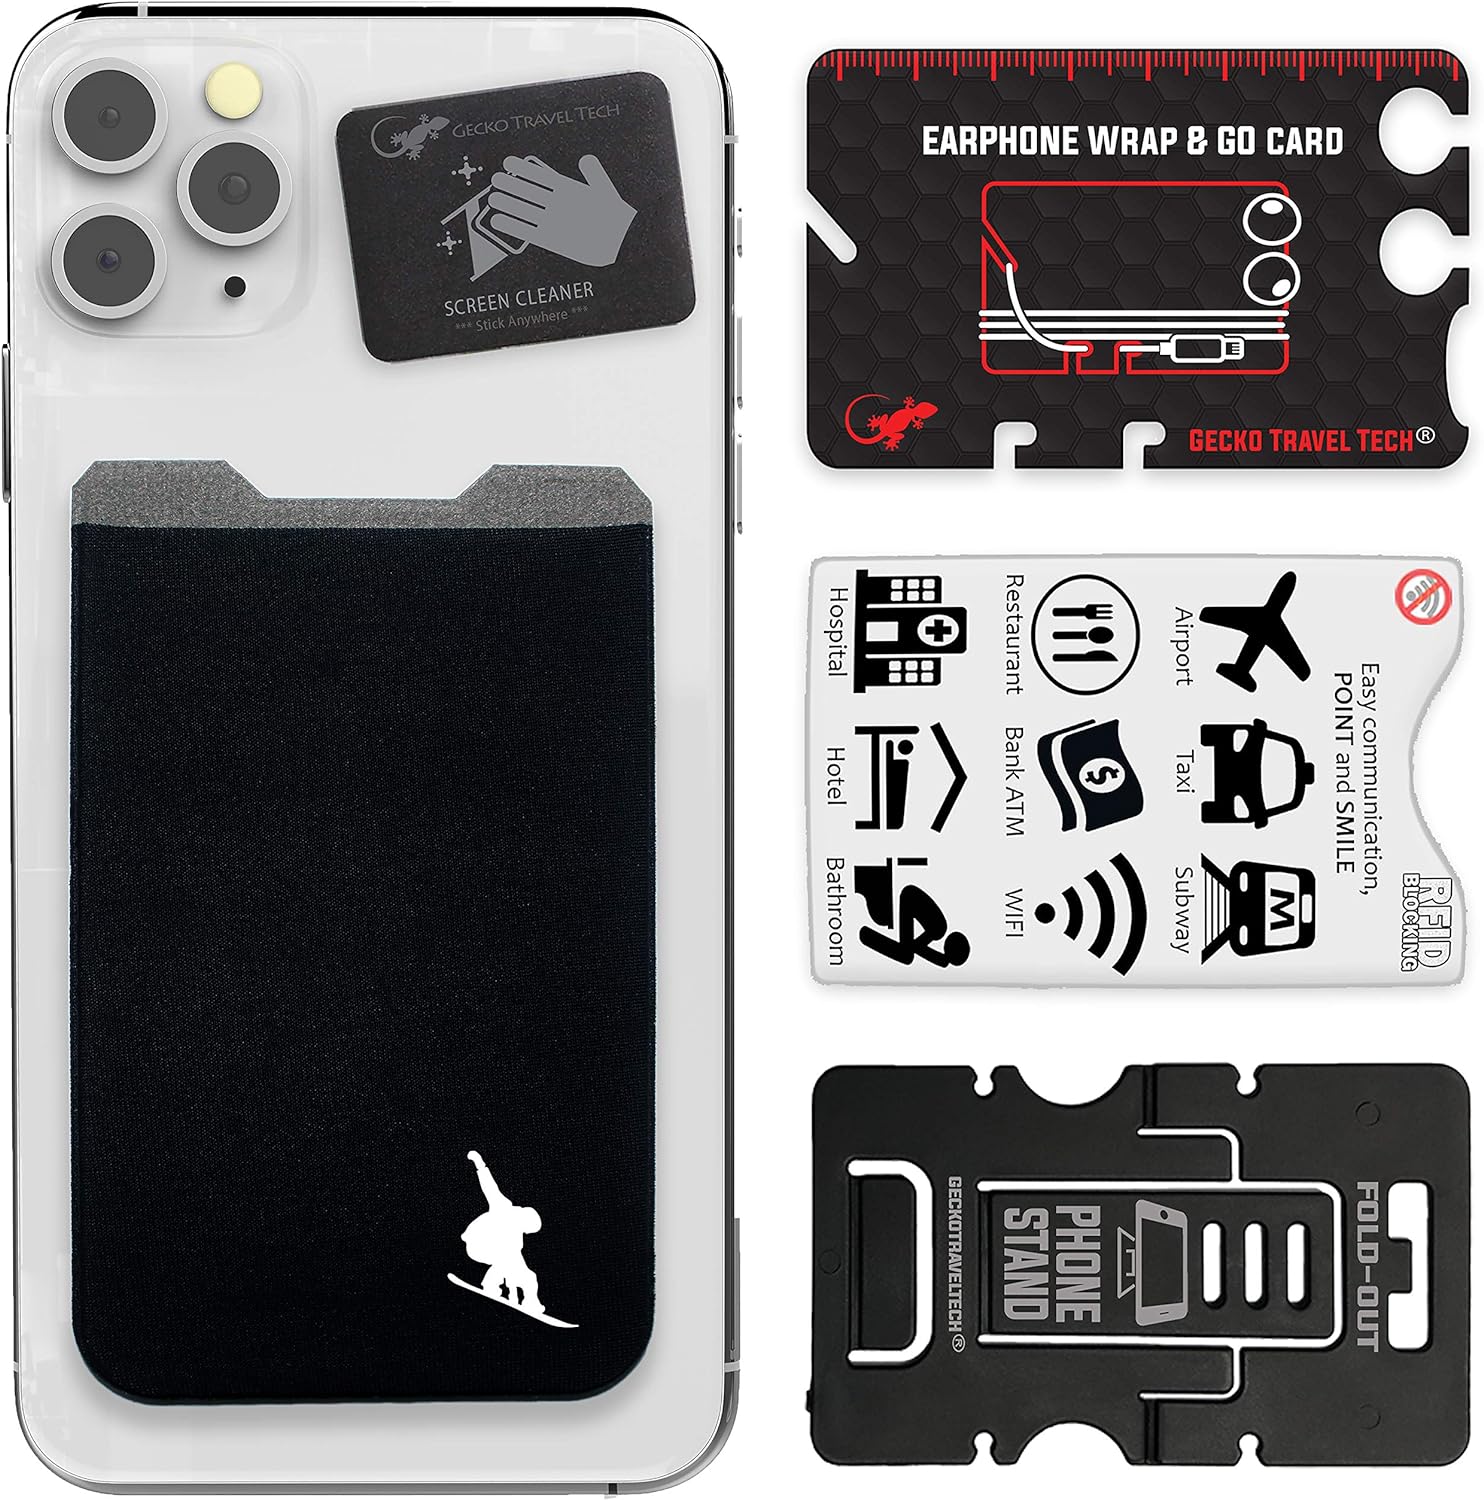 Snowboarder’s Card Holder and Phone Case